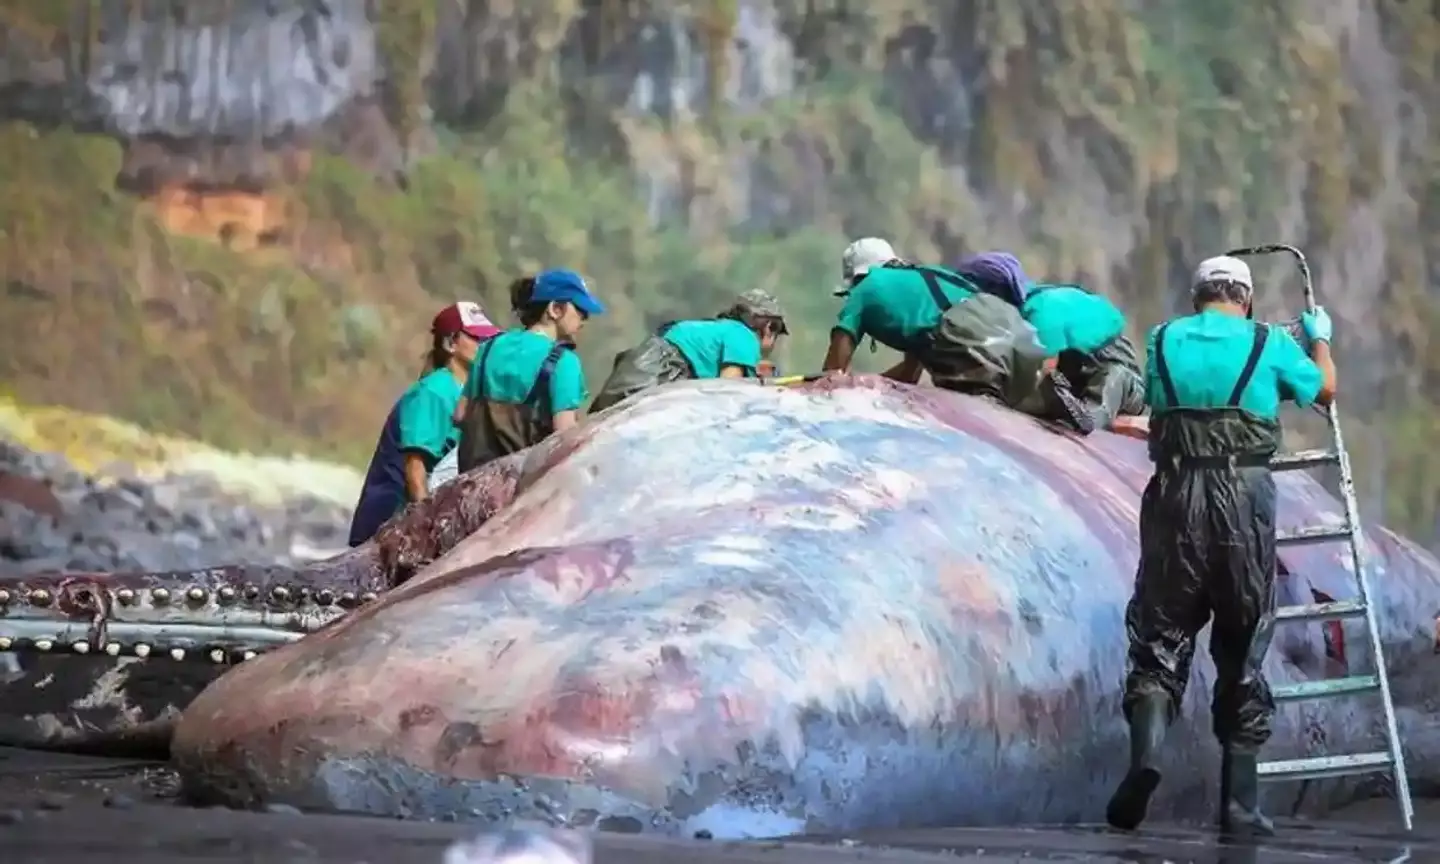 'Floating gold' worth a staggering £425,000 was found inside of the enormous whale carcass.